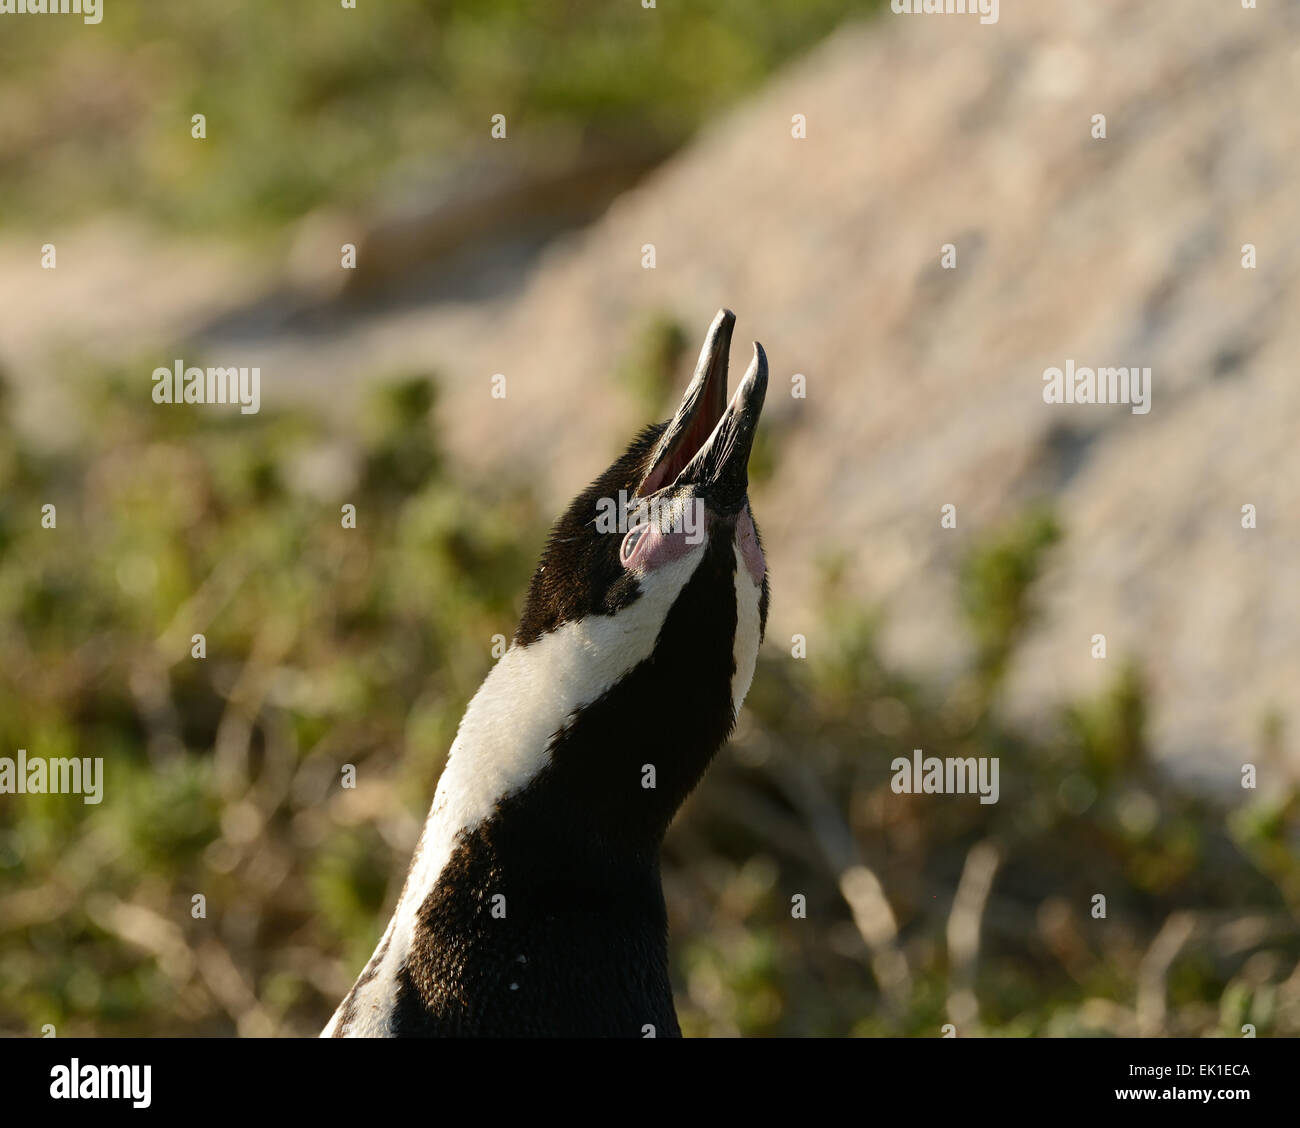 African Penguin (Spheniscus demersus) behind some bushes, at a beach near Cape Town in South Africa. Stock Photo